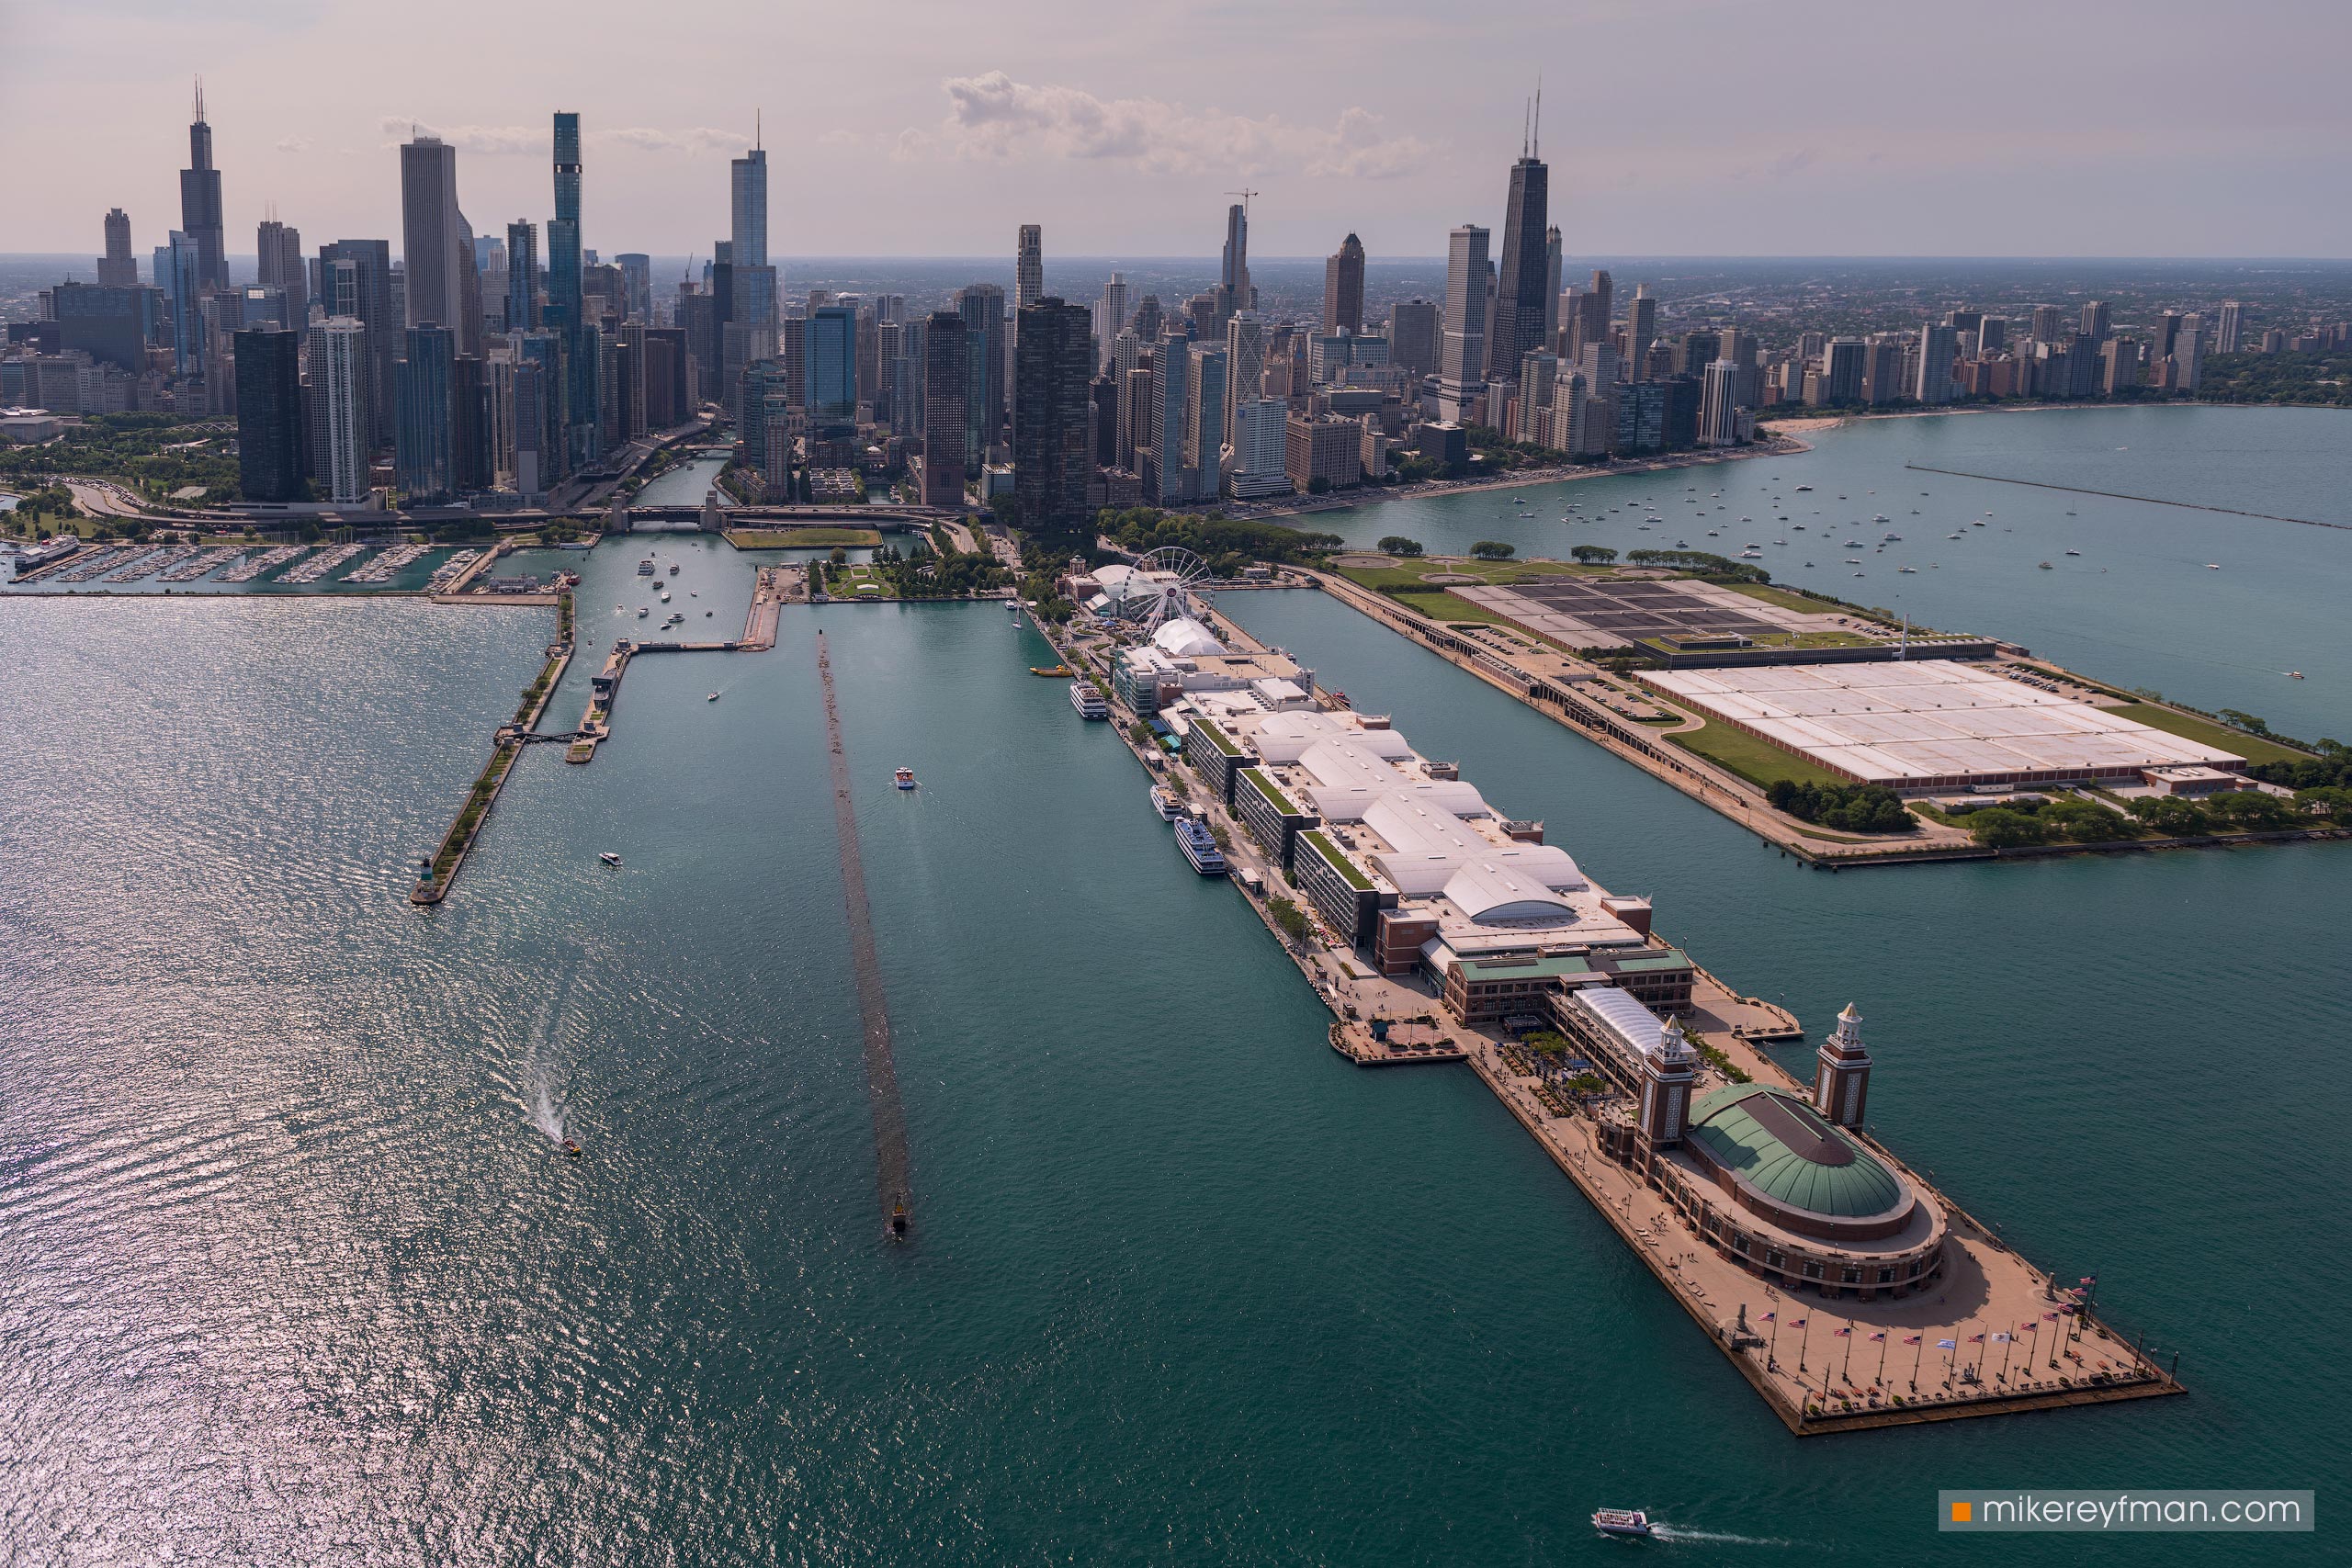 Aerial view of Chicago Skyline with Chicago Harbor and Navy Pier in the foreground. Chicago, Illinois, USA. 054-CH-2_50F1807 - Ever-beating architectural heart of America. The birthplace of the most iconic buildings in the country. - Mike Reyfman Photography